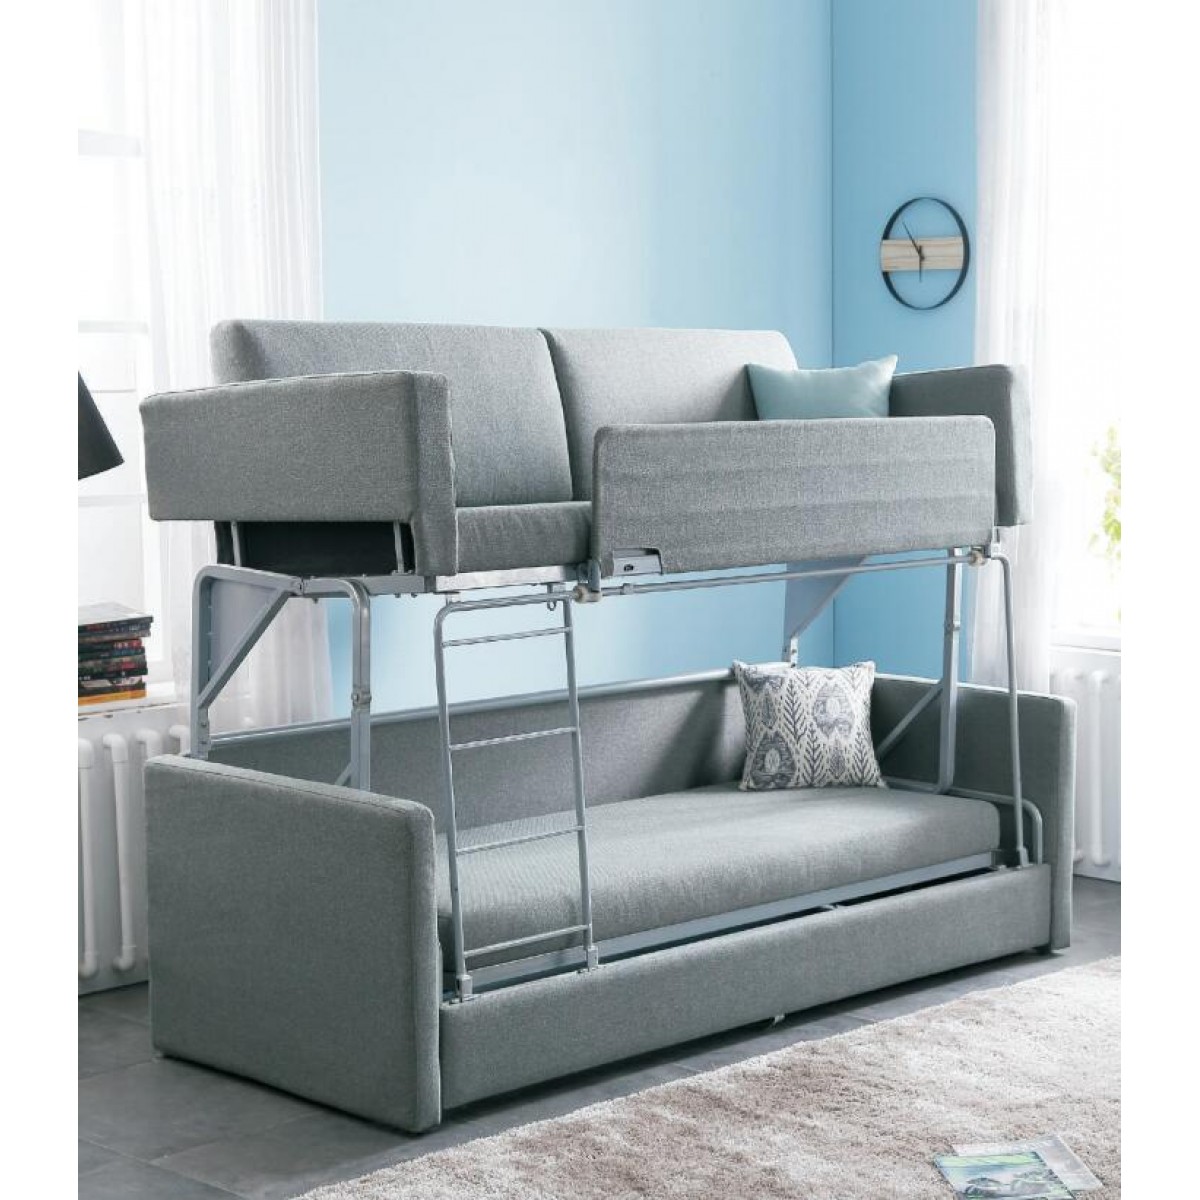 Folding Functional Sofa Bed Fashion Bunk Bed For Living Room Furniture Iron Durable Frame